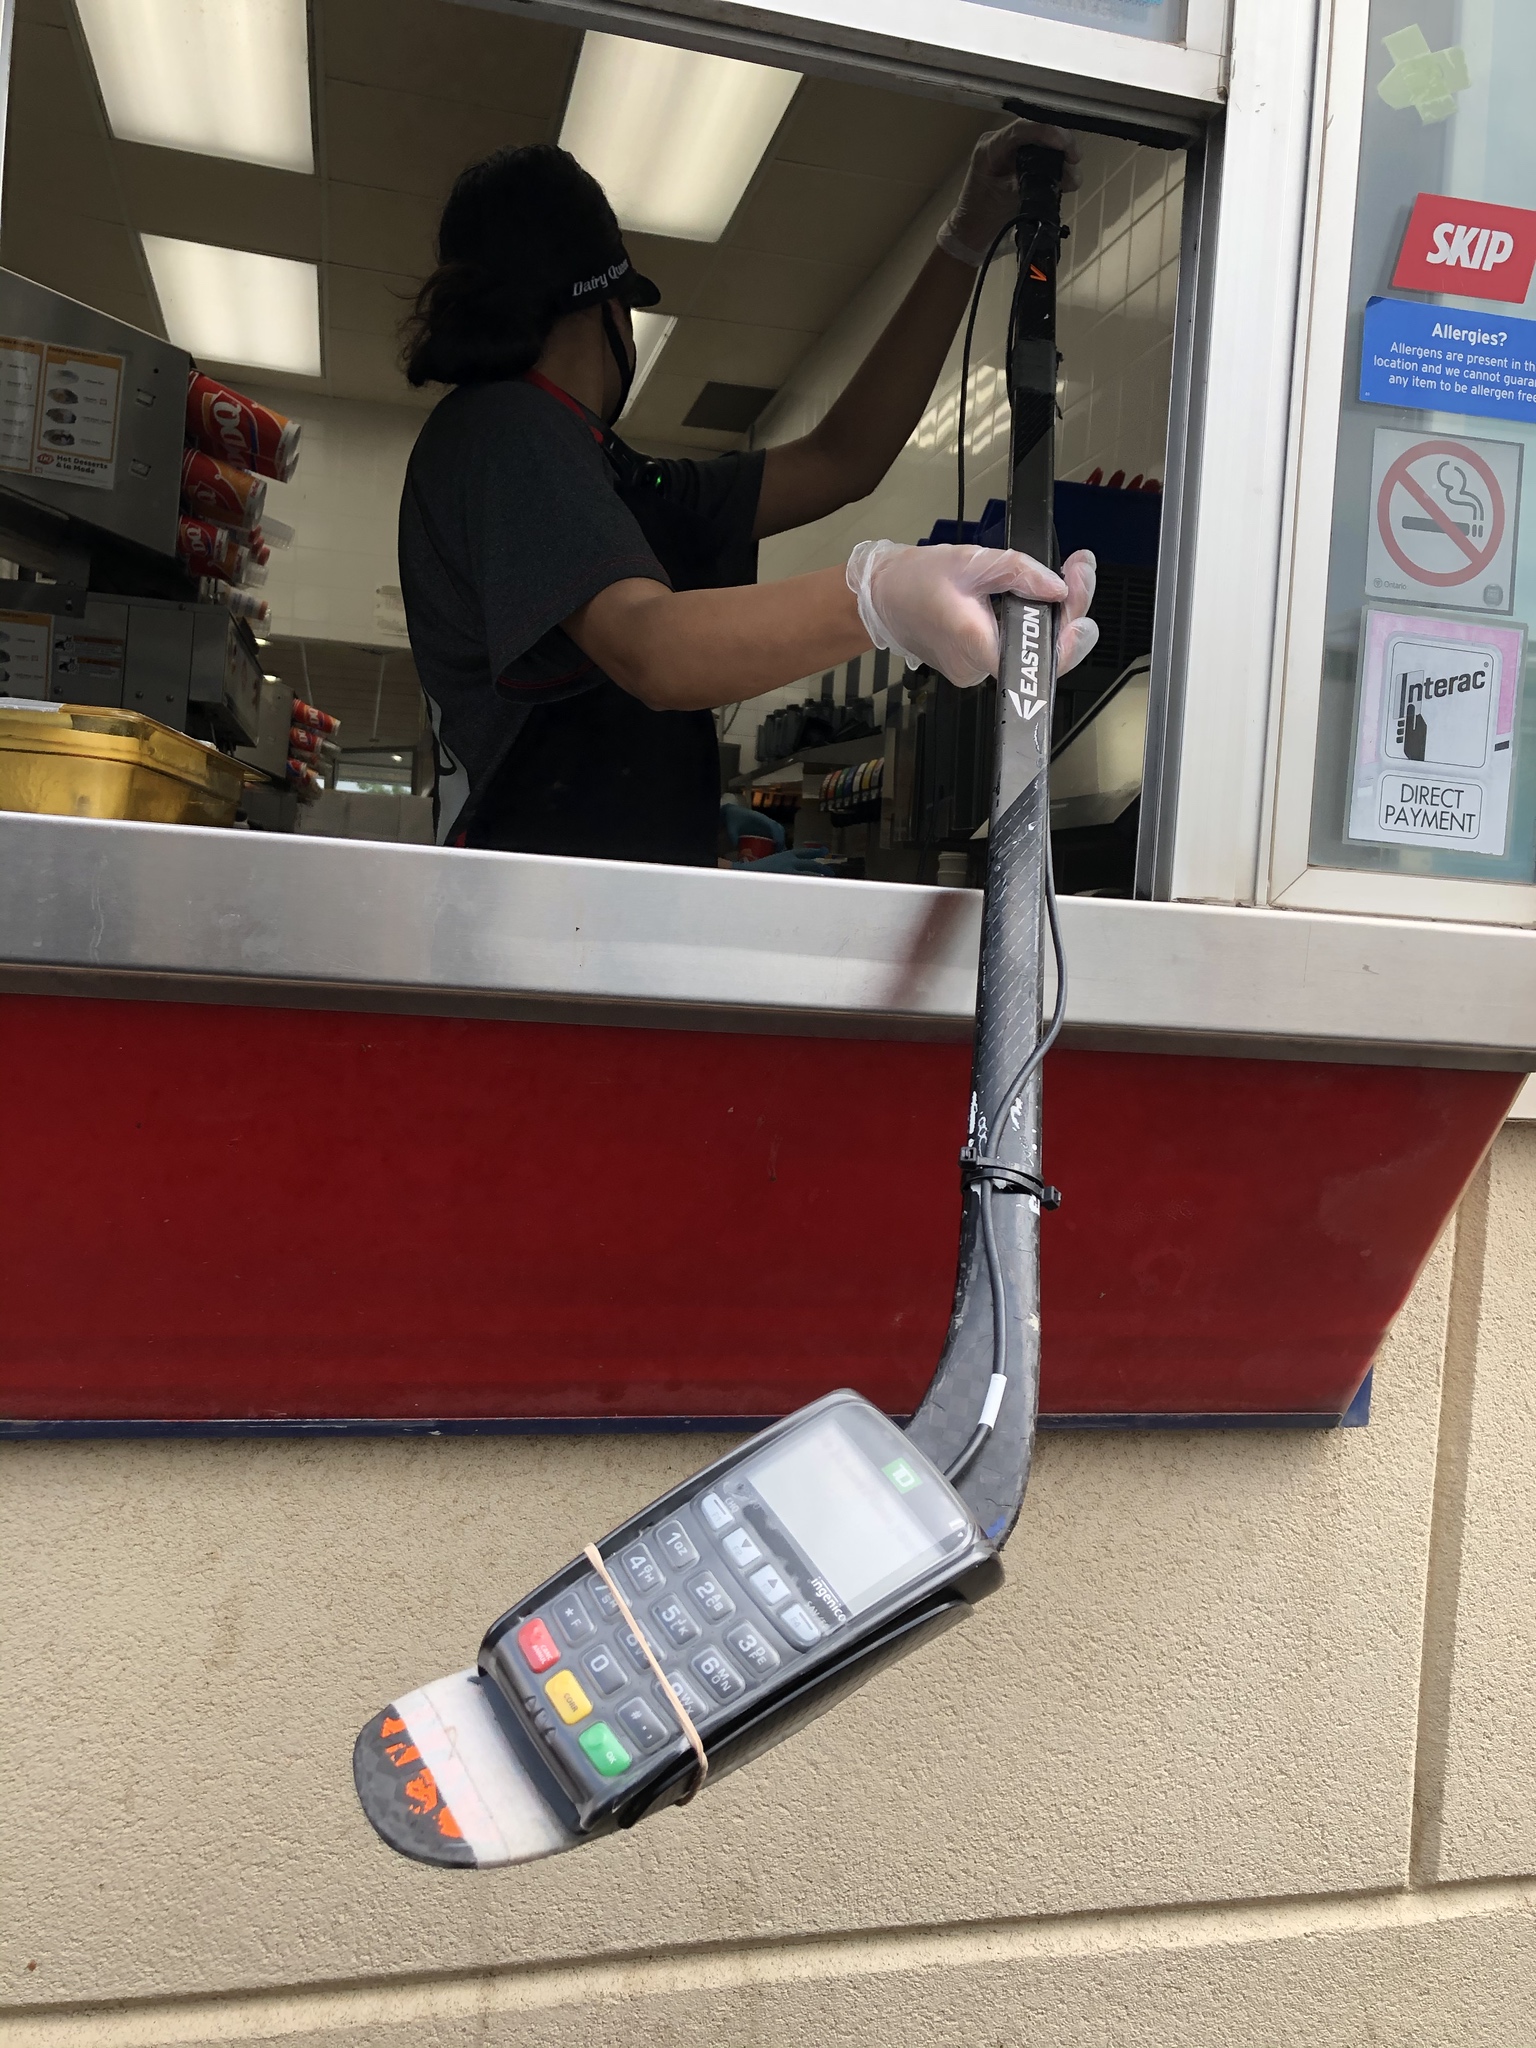 Dairy Queen Canada using a hockey stick for socially distance payments.